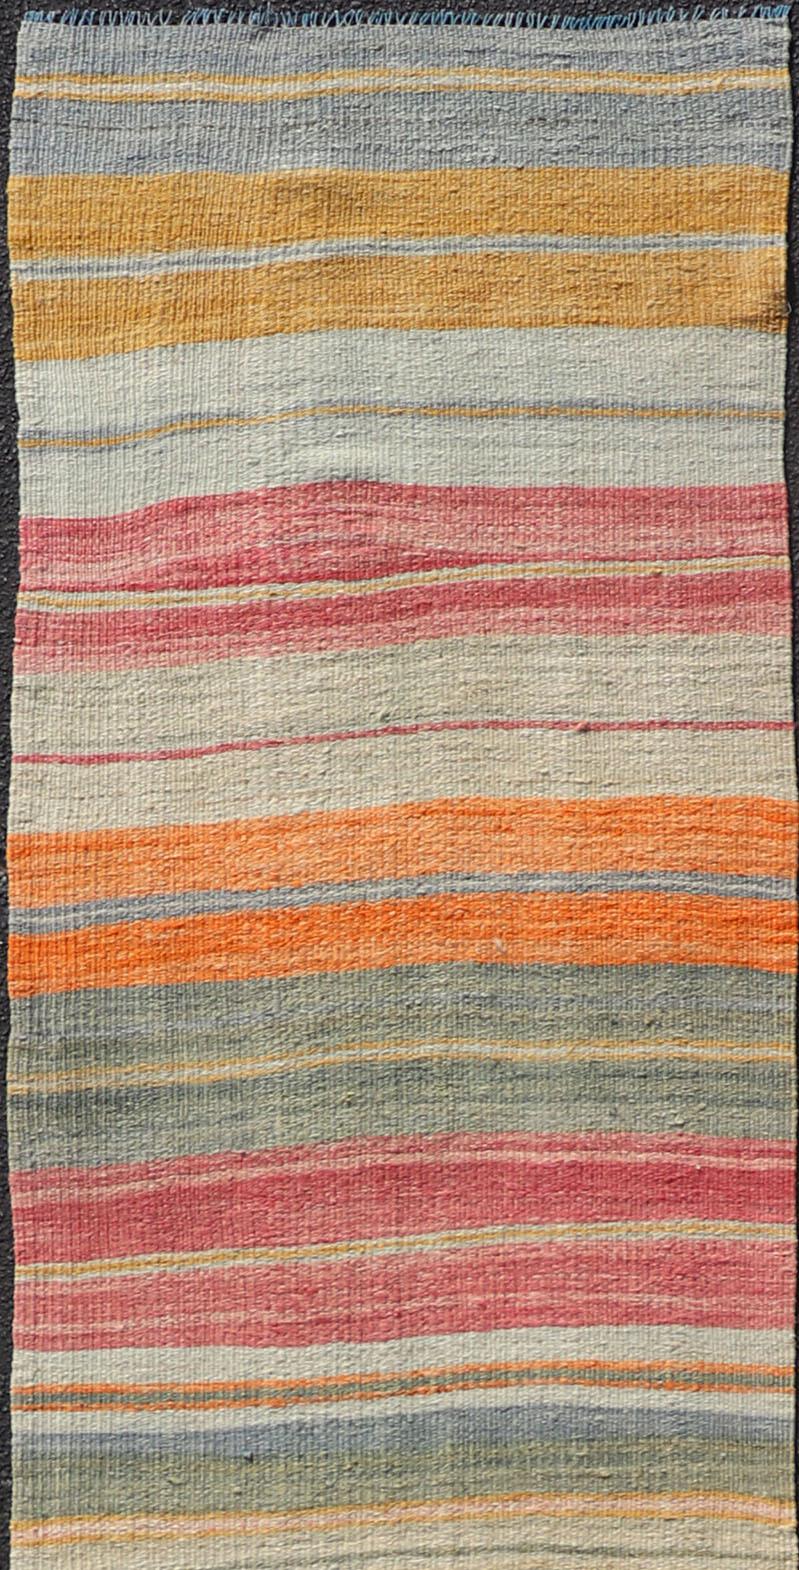 Hand-Woven Vintage Turkish Kilim Runner with Horizontal Stripes in Bright Color Tones For Sale